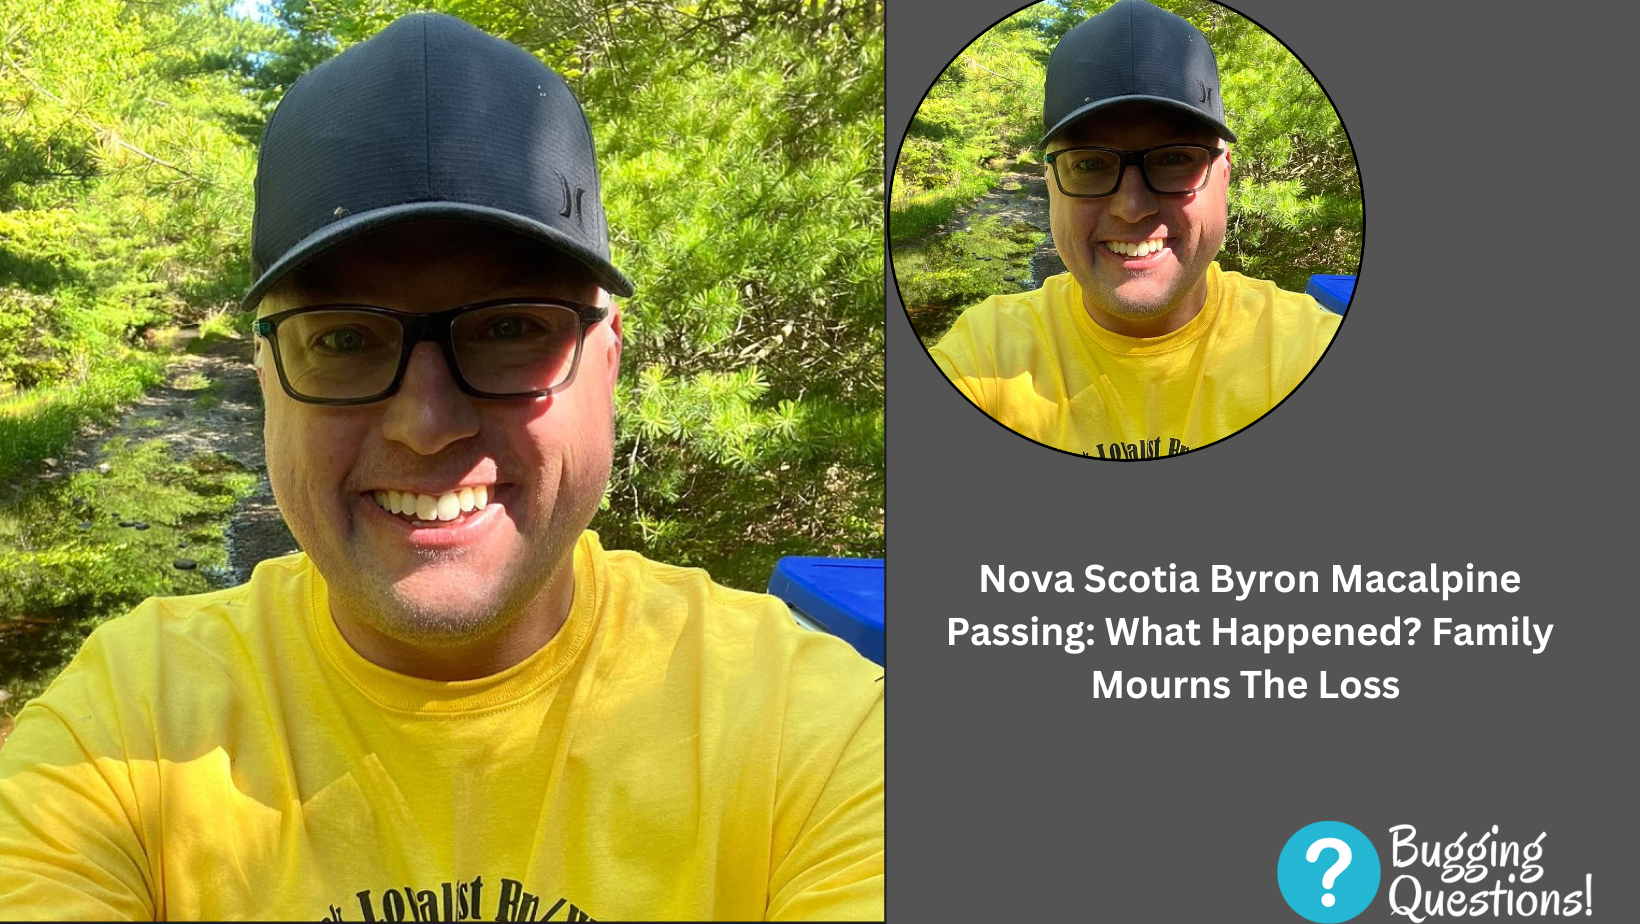 Nova Scotia Byron Macalpine Passing: What Happened? Family Mourns The Loss